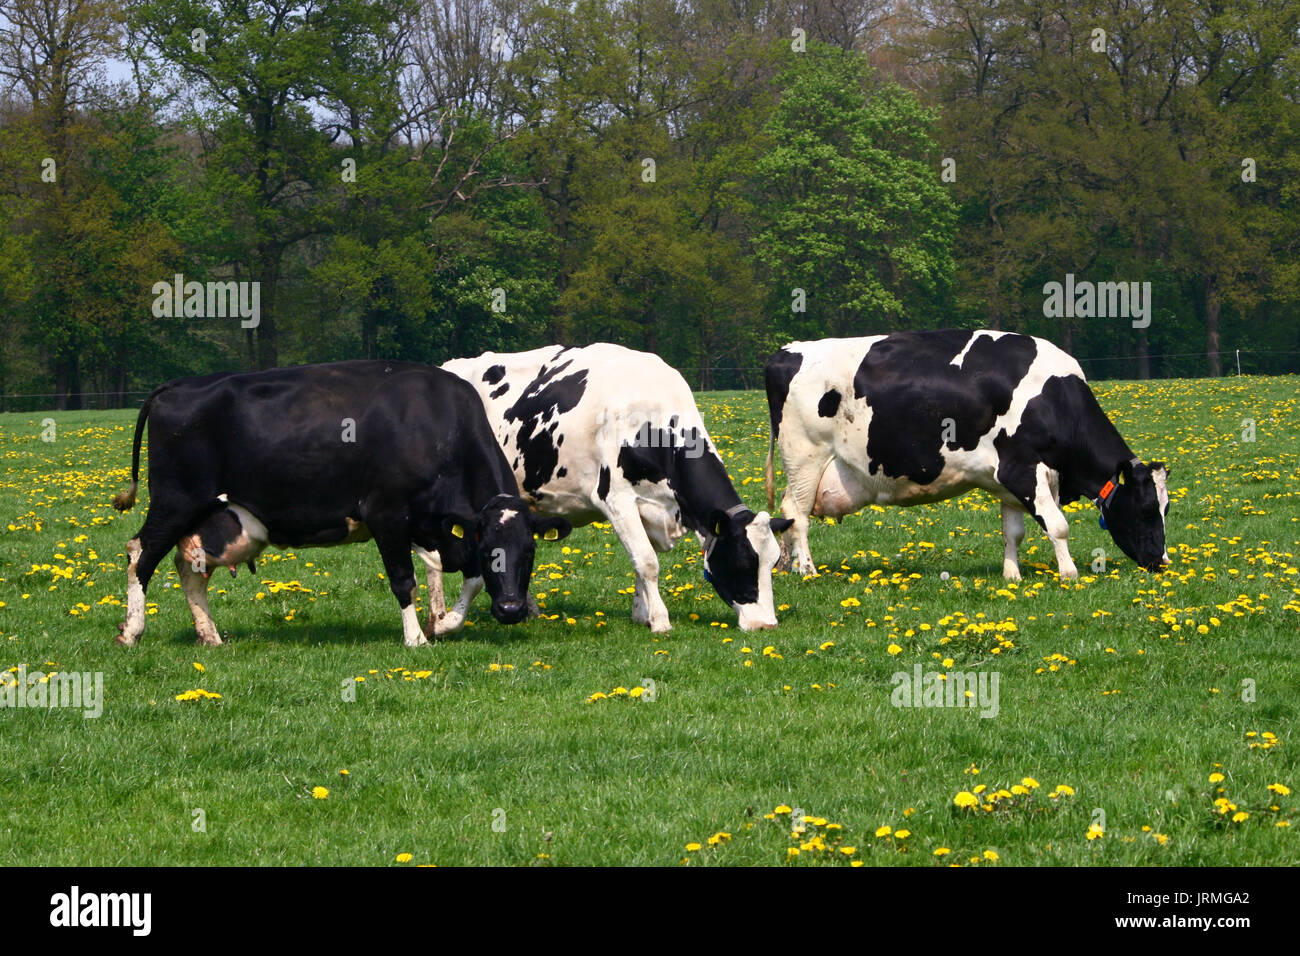 Black and white Holstein Friesian cow grazing in grassland. Stock Photo